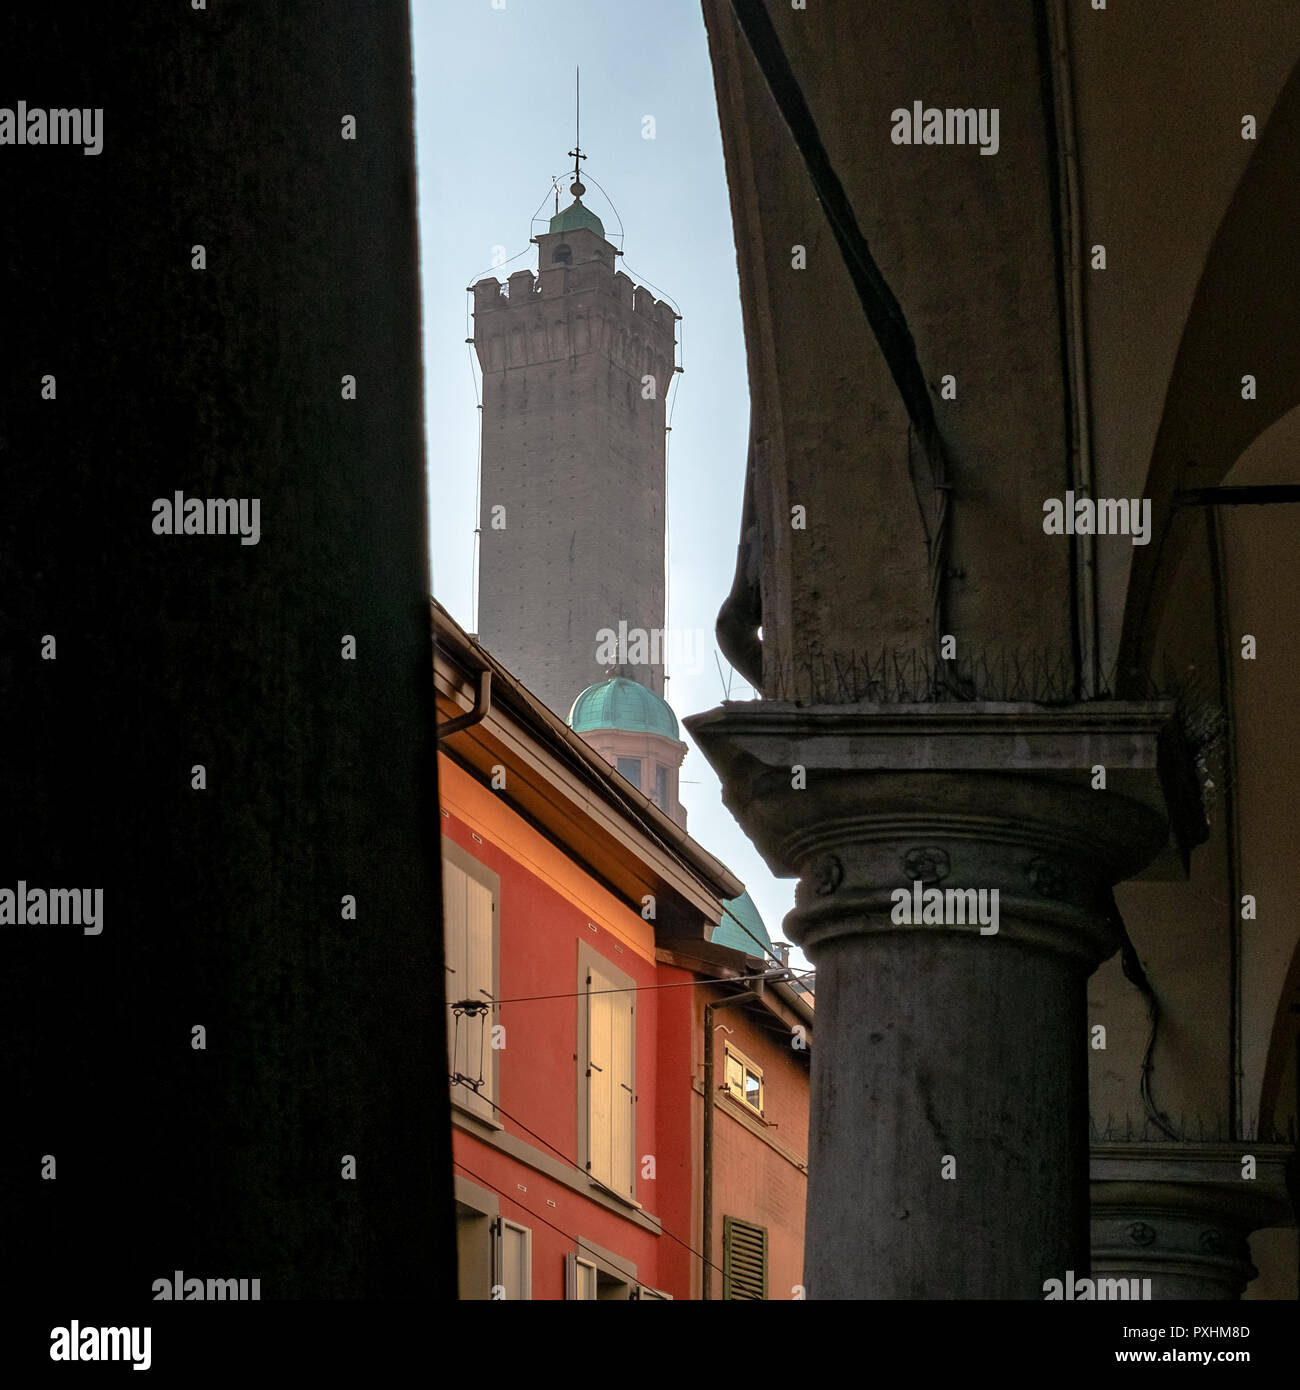 Glimpse of the famous Asinelli tower. Taken from under a porch. Bologna, Emilia Romagna, Italy. Stock Photo